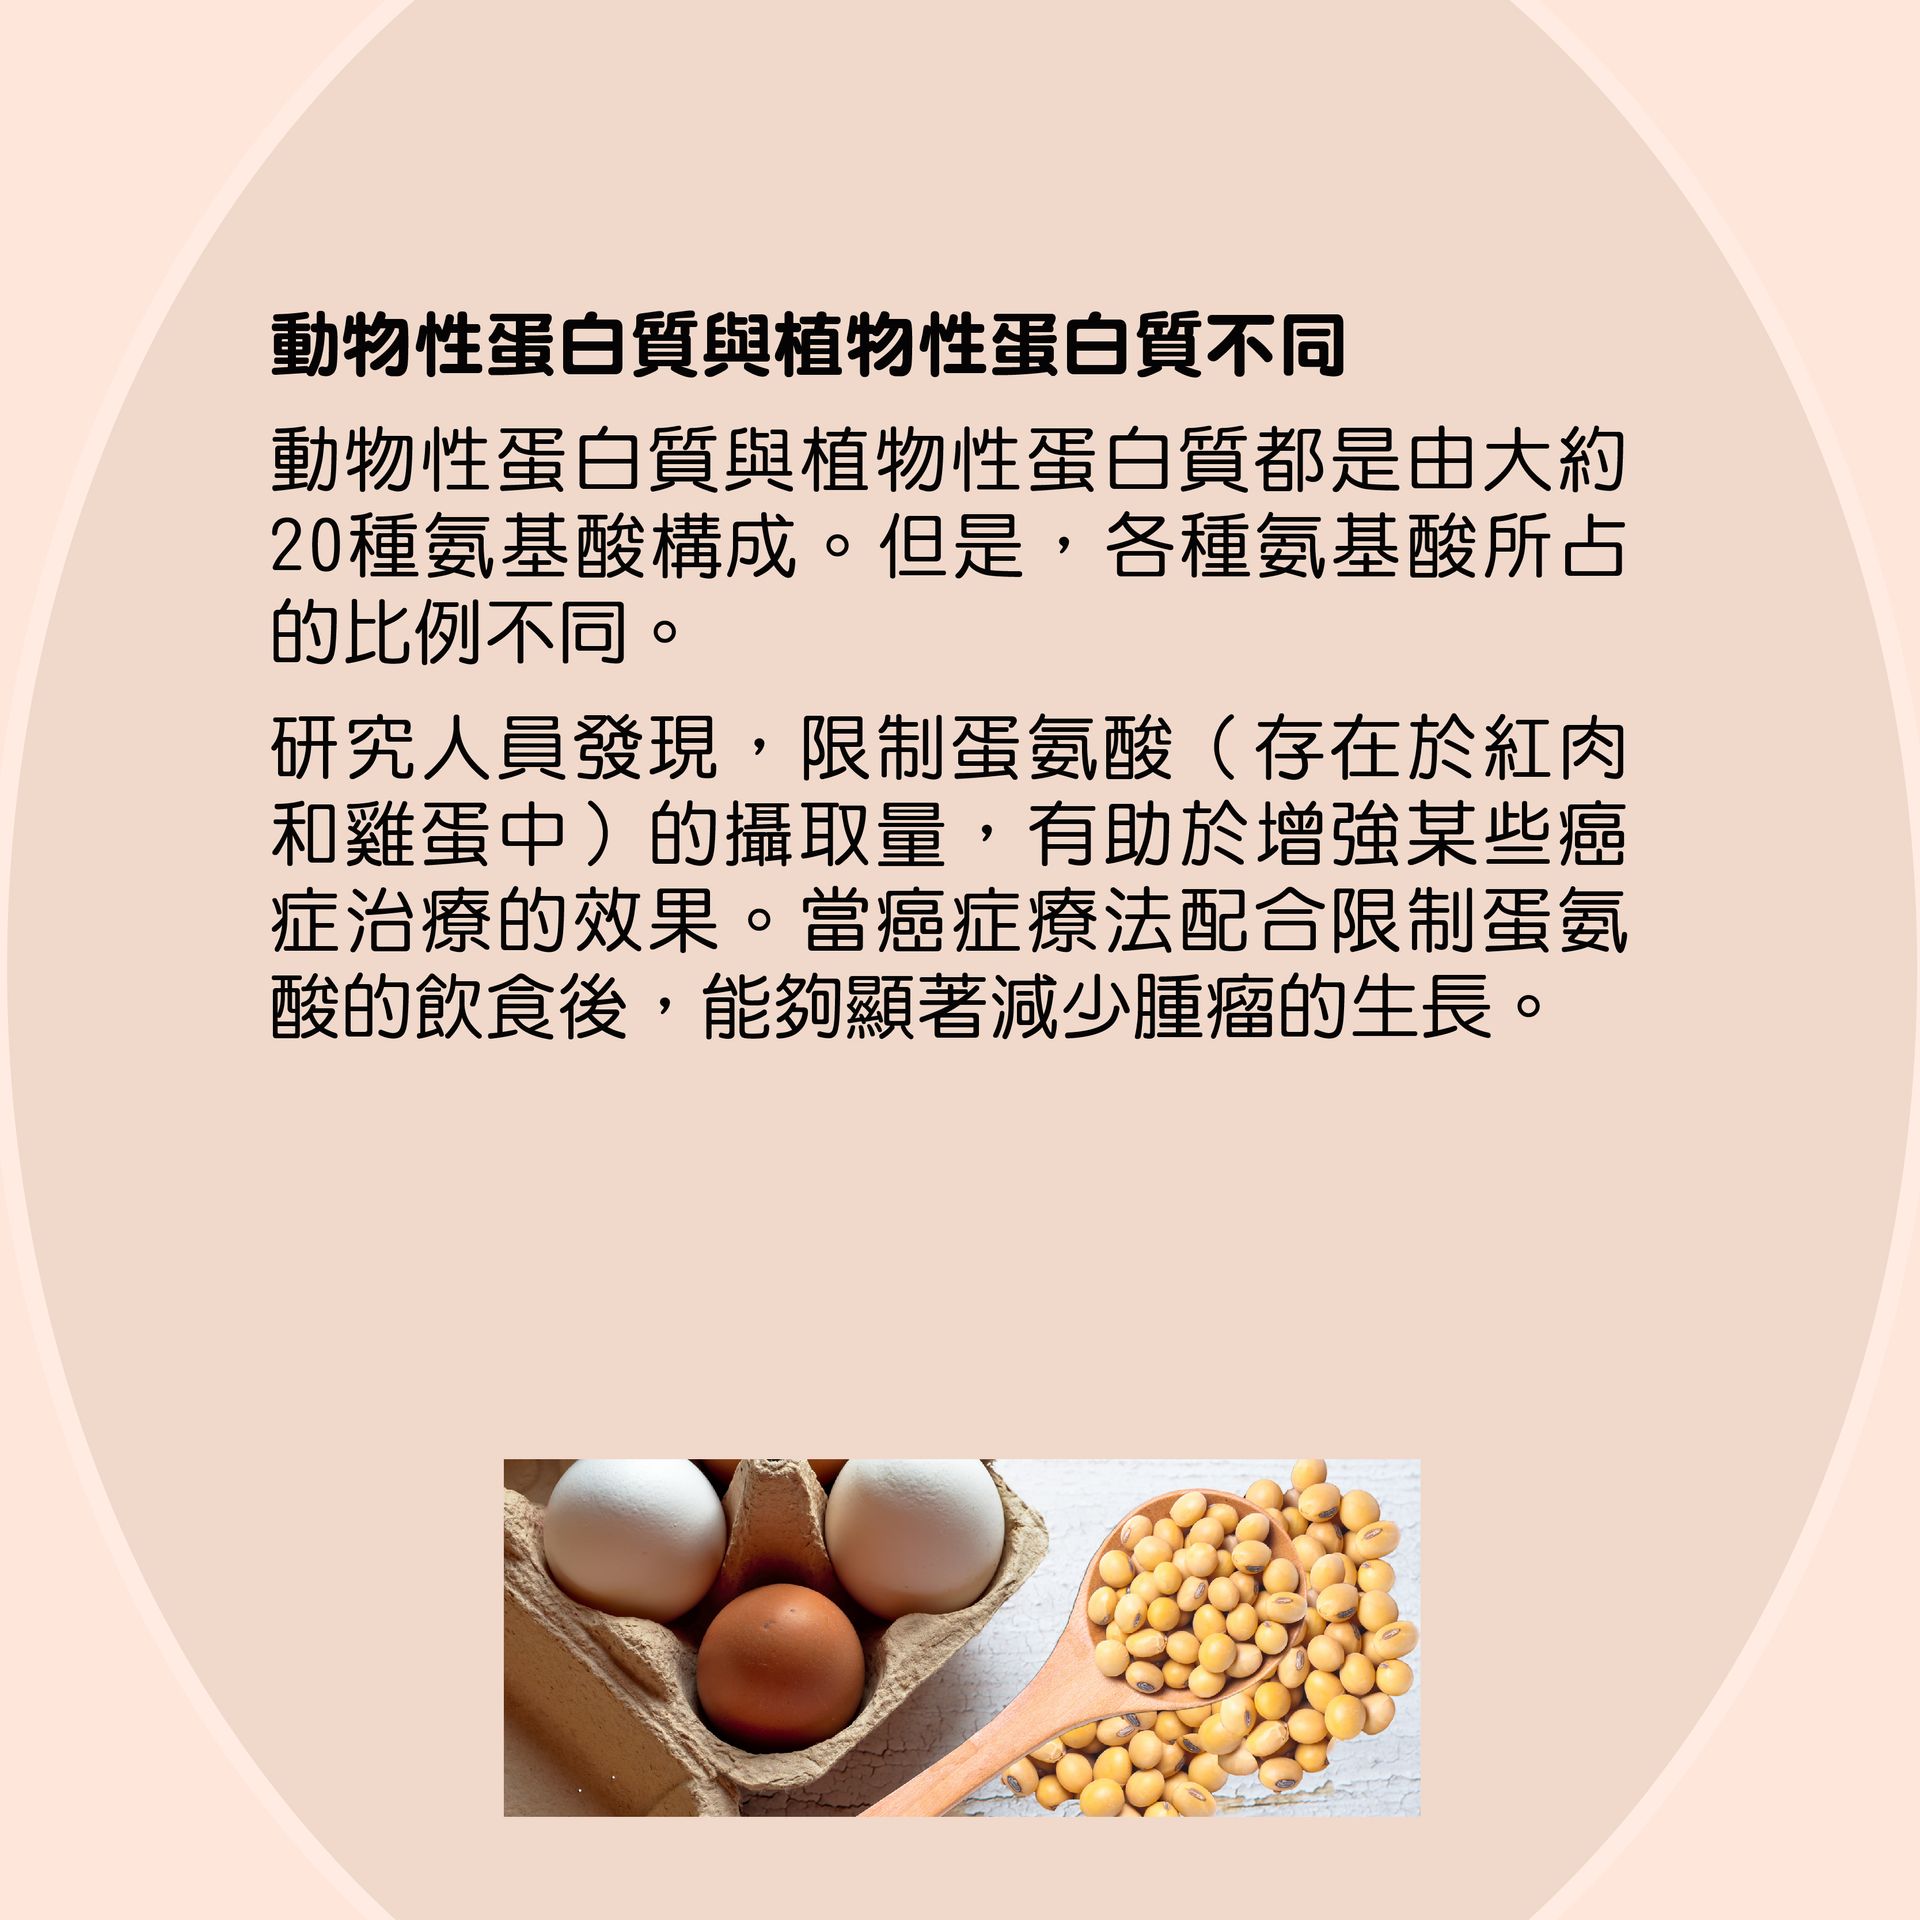 Soybean - plant and animal proteins